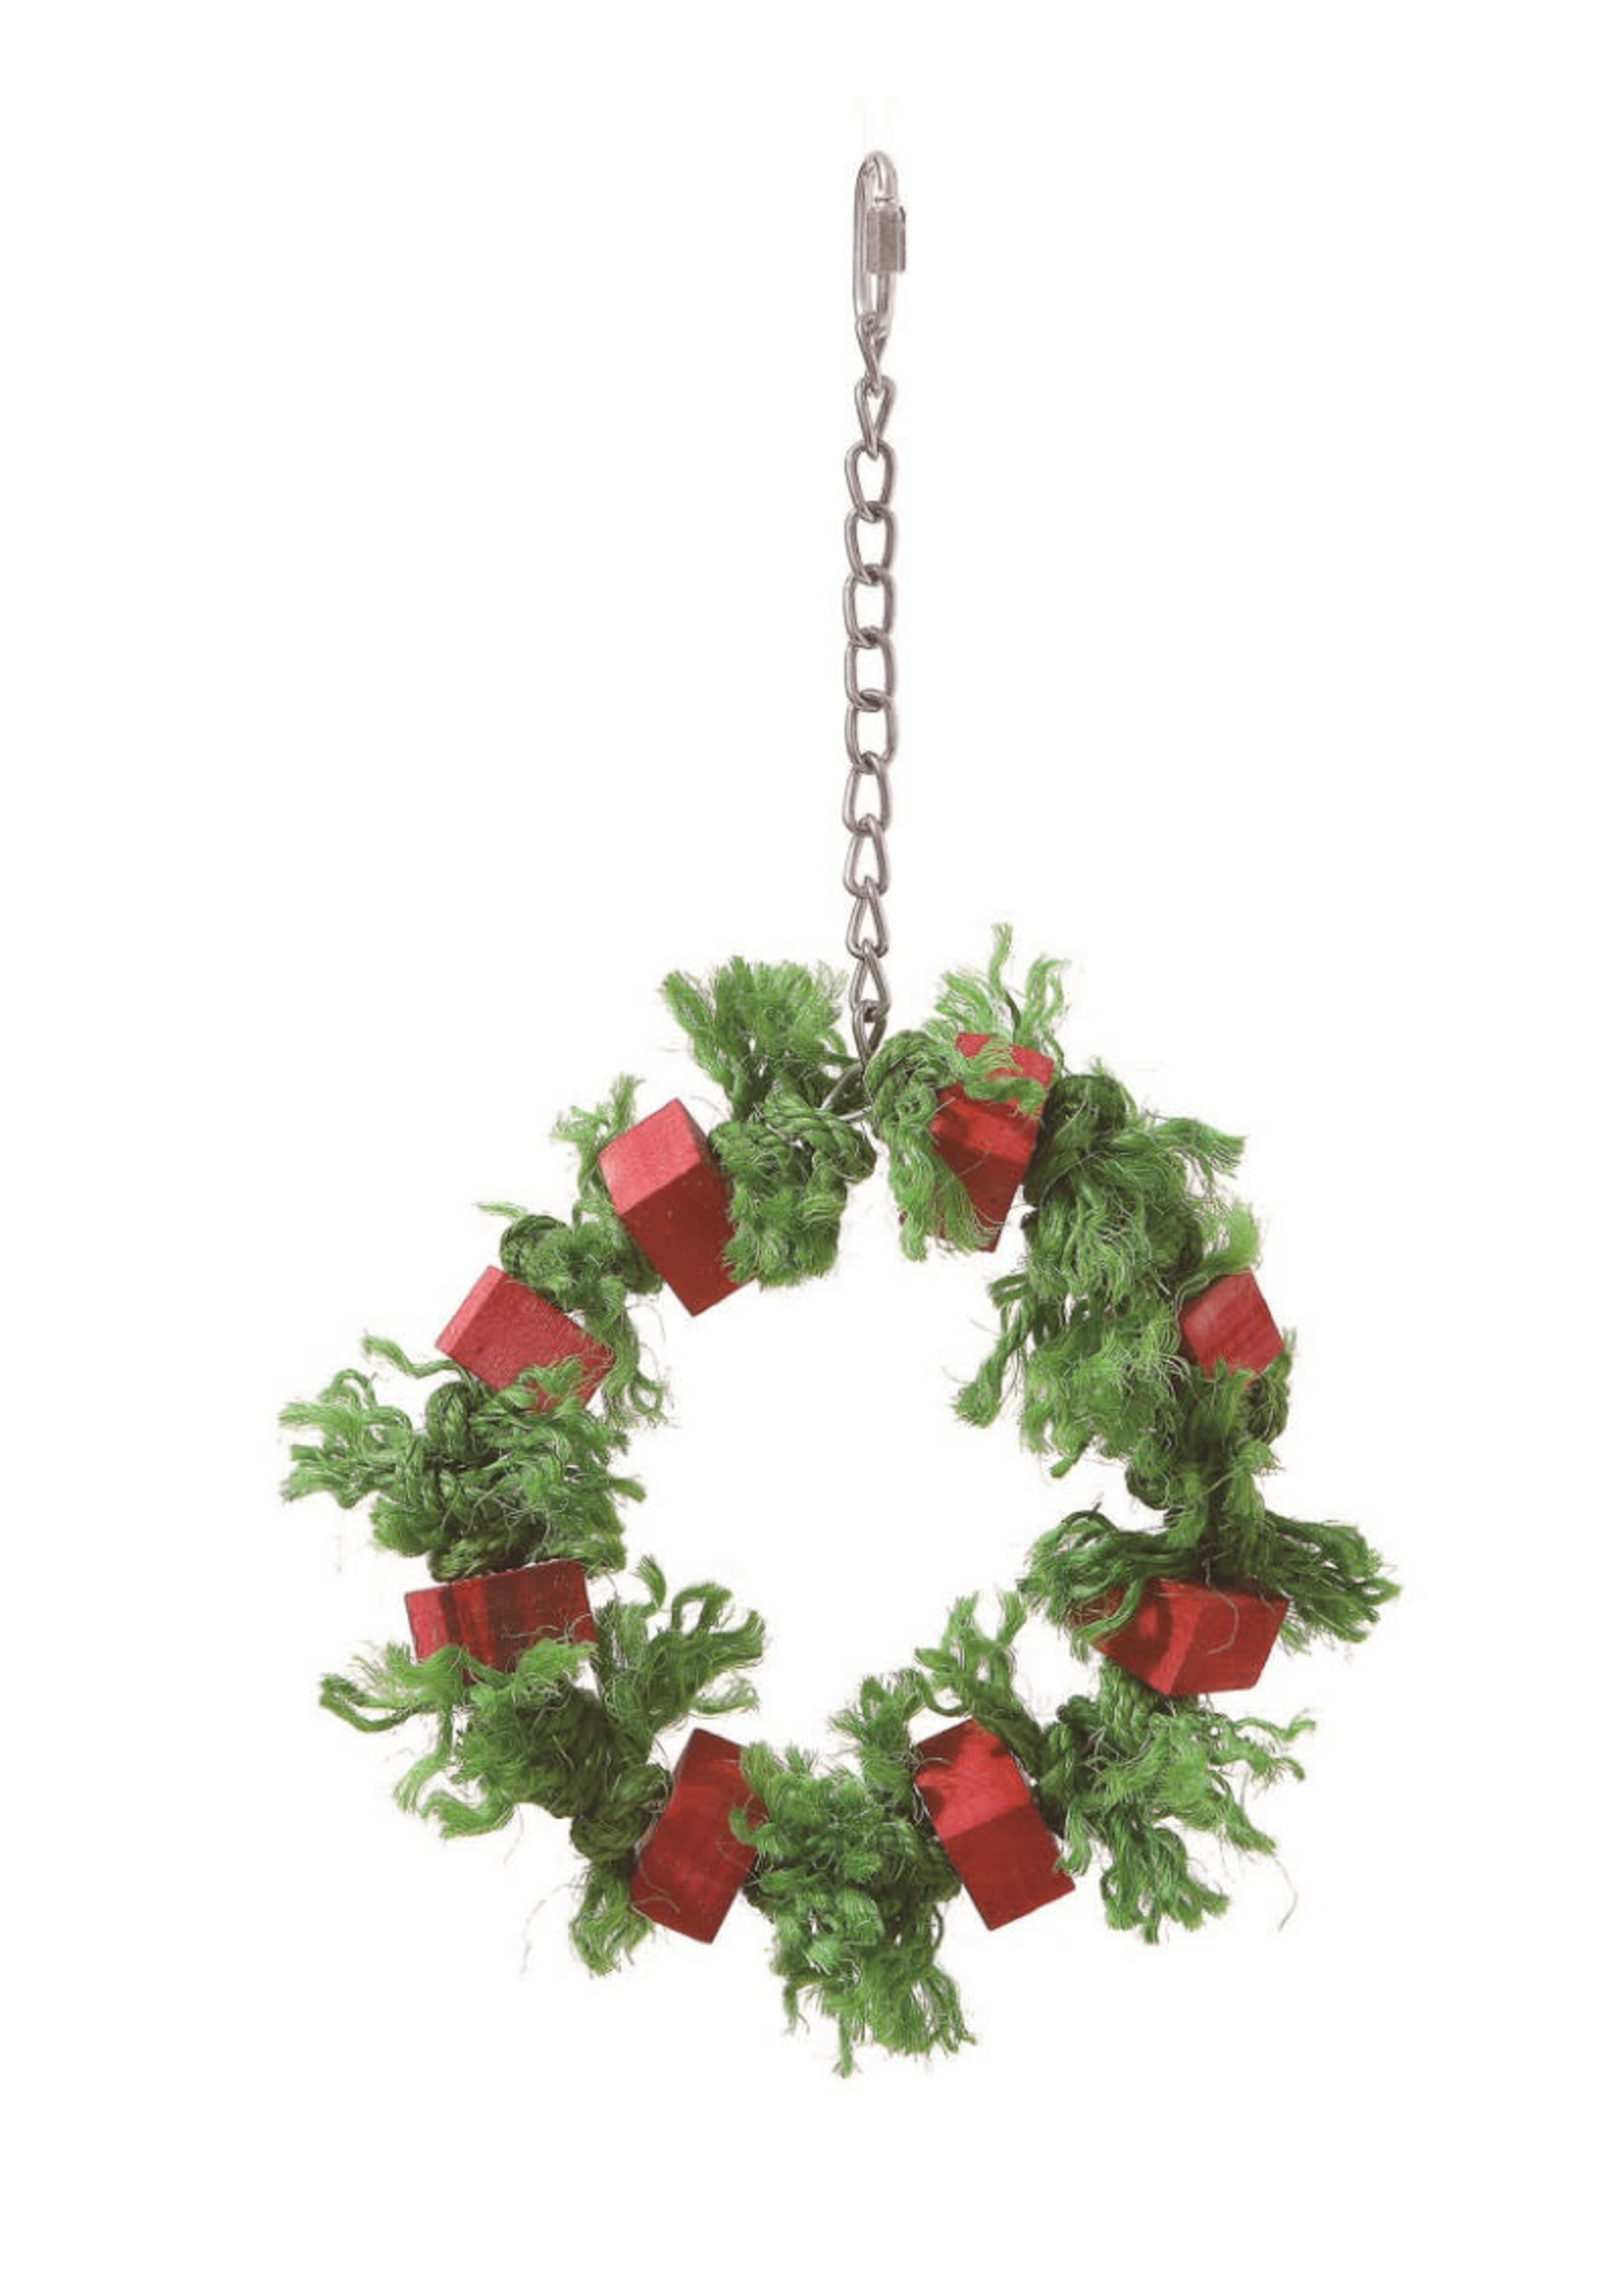 Jolly Jungle Jolly Jungle Christmas Wreath with Sisal Rope and Wooden Blocks 8" Diameter